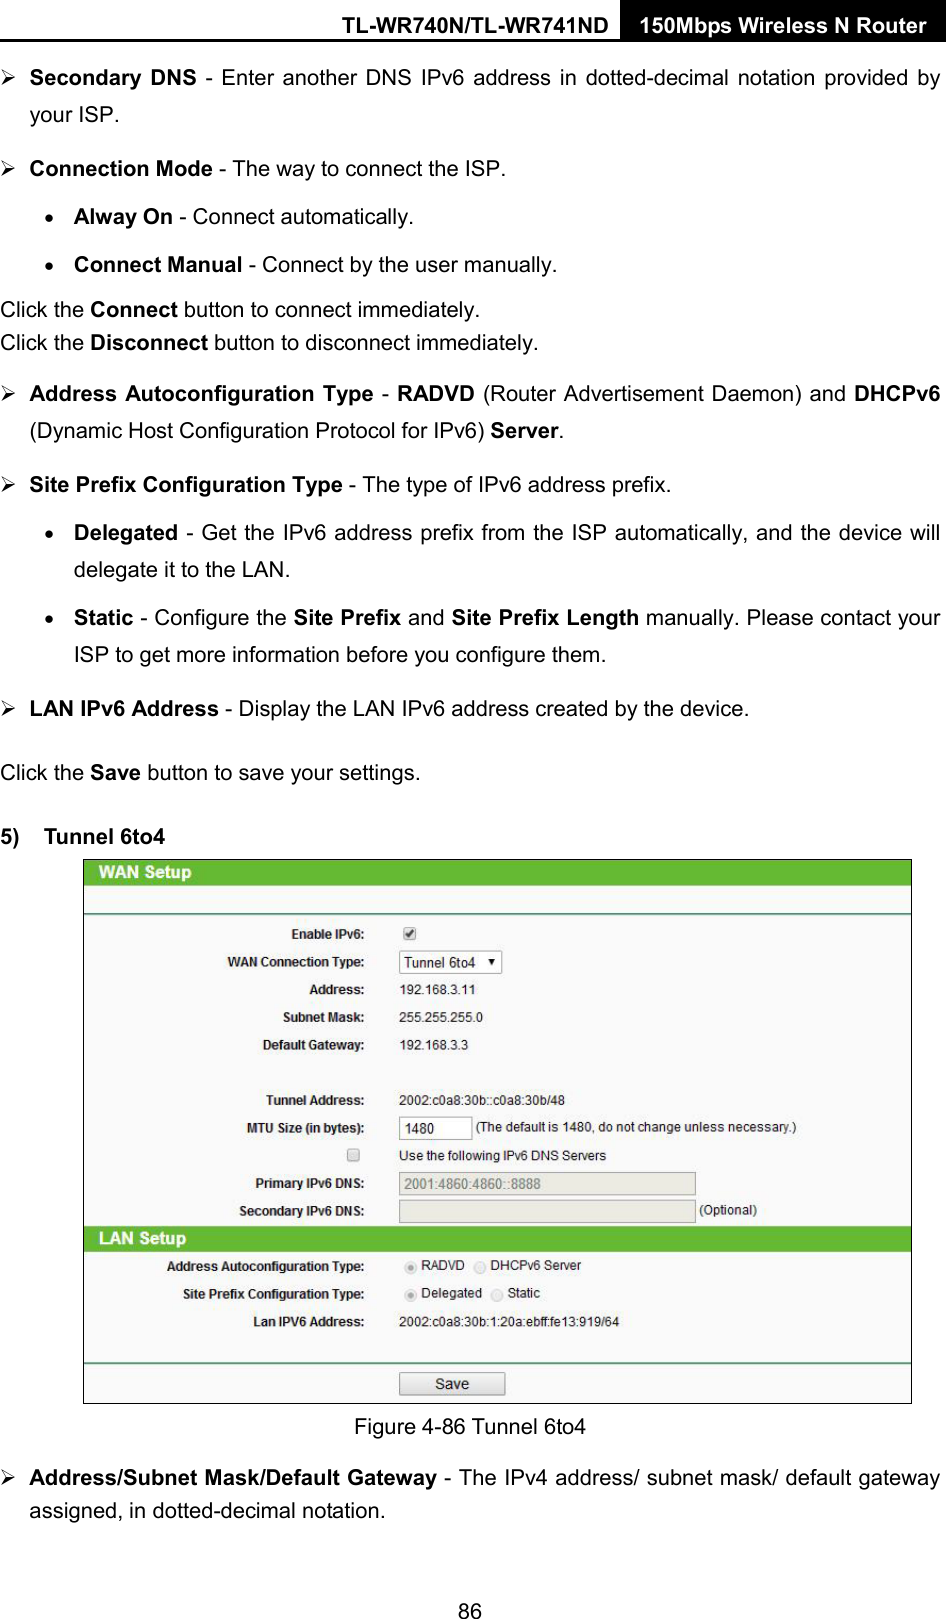 TL-WR740N/TL-WR741ND 150Mbps Wireless N Router   Secondary DNS  -  Enter another DNS IPv6 address in dotted-decimal notation provided by your ISP.  Connection Mode - The way to connect the ISP. • Alway On - Connect automatically. • Connect Manual - Connect by the user manually. Click the Connect button to connect immediately. Click the Disconnect button to disconnect immediately.  Address Autoconfiguration Type - RADVD (Router Advertisement Daemon) and DHCPv6 (Dynamic Host Configuration Protocol for IPv6) Server.  Site Prefix Configuration Type - The type of IPv6 address prefix. • Delegated - Get the IPv6 address prefix from the ISP automatically, and the device will delegate it to the LAN. • Static - Configure the Site Prefix and Site Prefix Length manually. Please contact your ISP to get more information before you configure them.  LAN IPv6 Address - Display the LAN IPv6 address created by the device. Click the Save button to save your settings. 5) Tunnel 6to4   Figure 4-86 Tunnel 6to4  Address/Subnet Mask/Default Gateway - The IPv4 address/ subnet mask/ default gateway assigned, in dotted-decimal notation. 86 